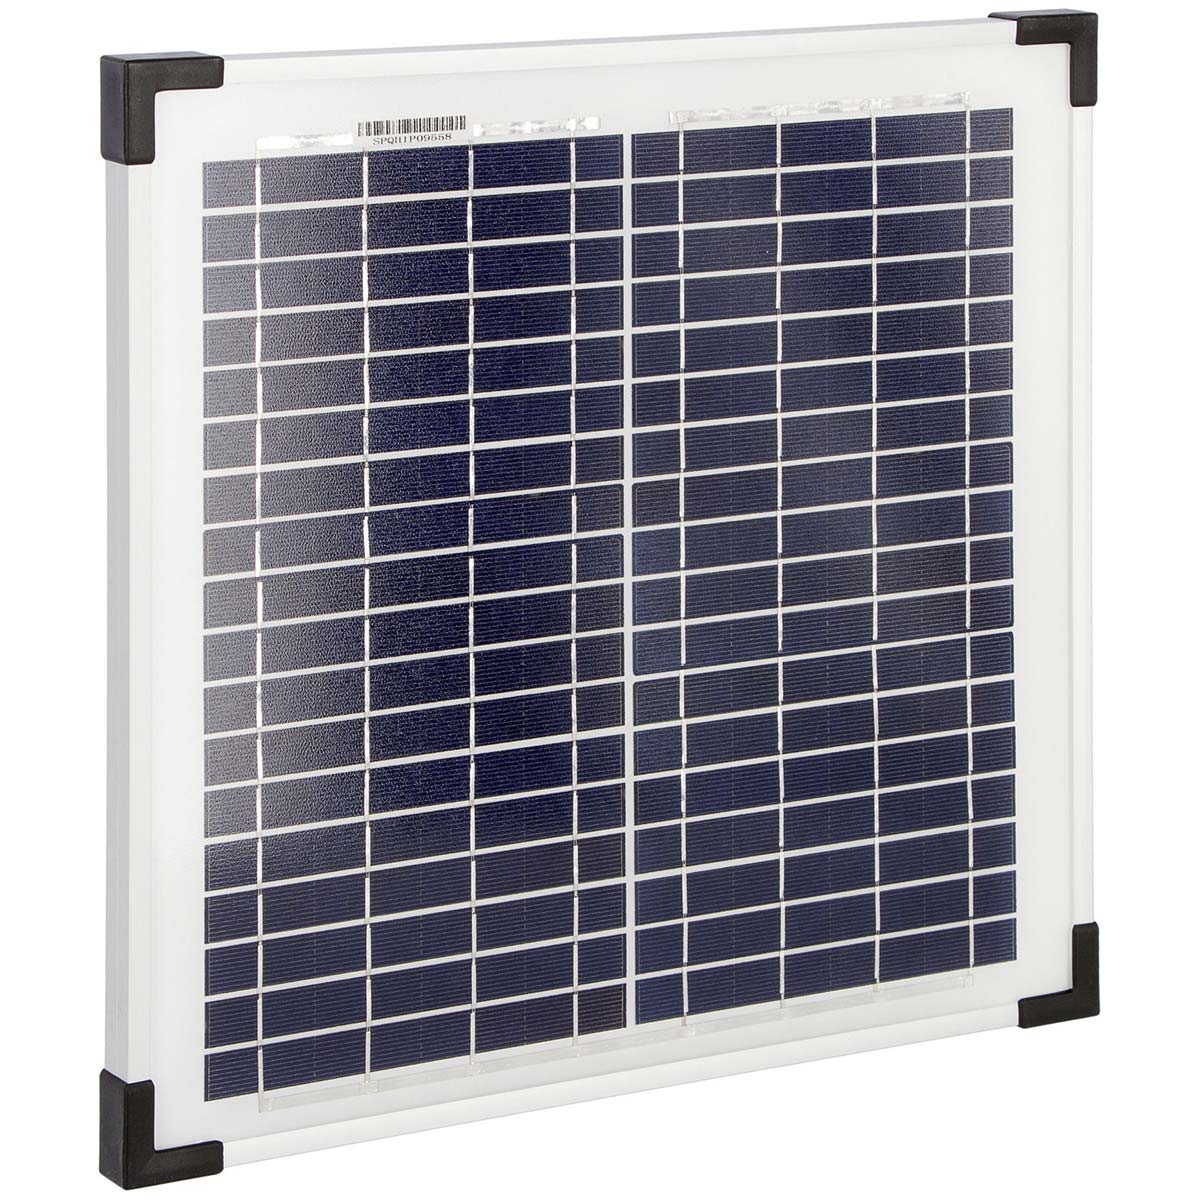 Solarpanel 15 watt without charge controller